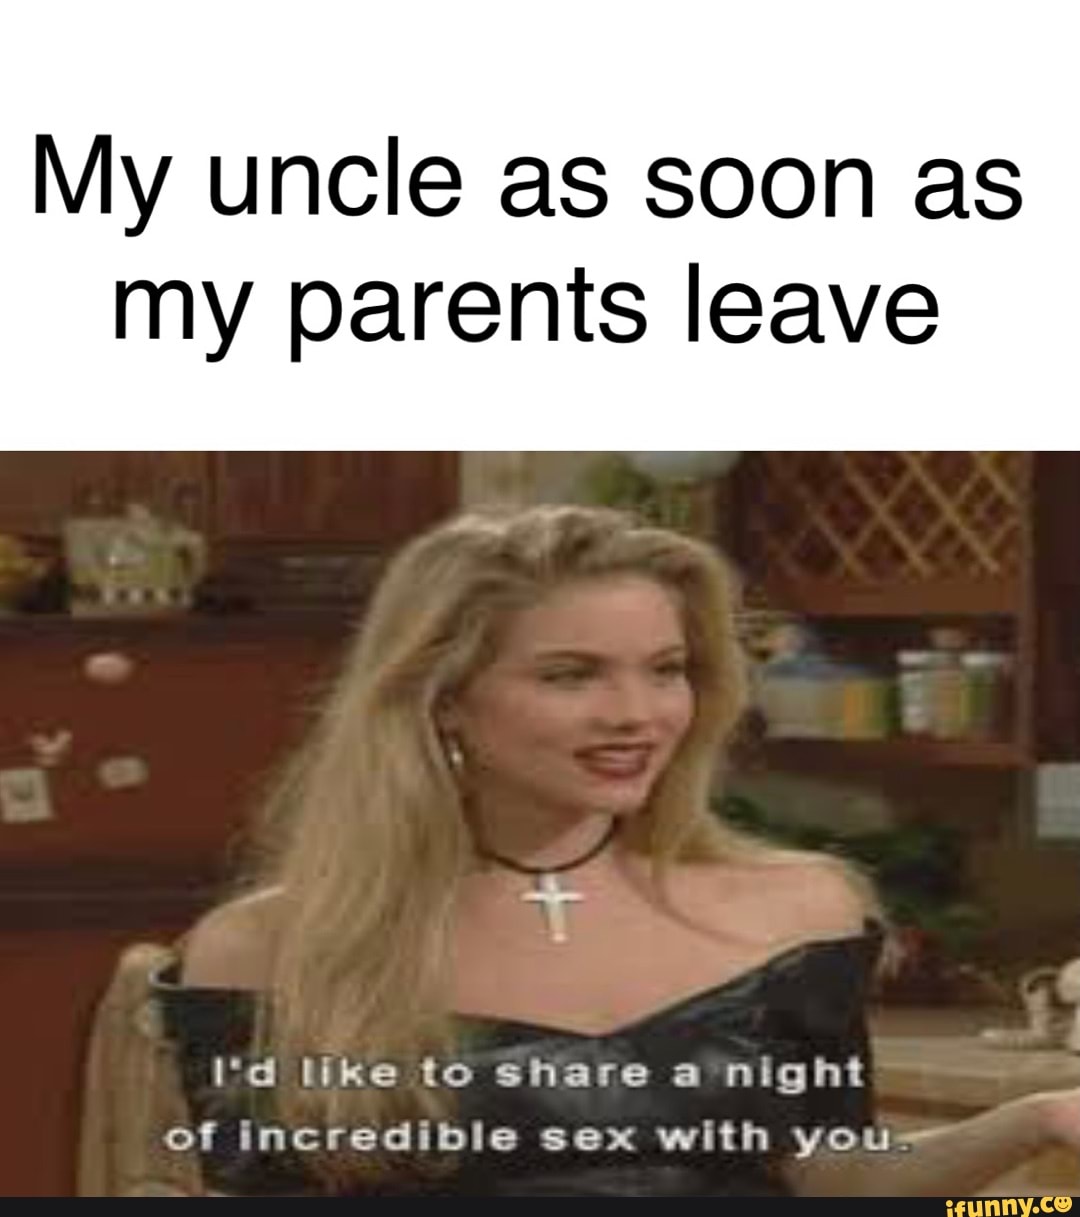 My uncle as soon as my parents leave Id like to share a night of incredible sex with you/u003d photo